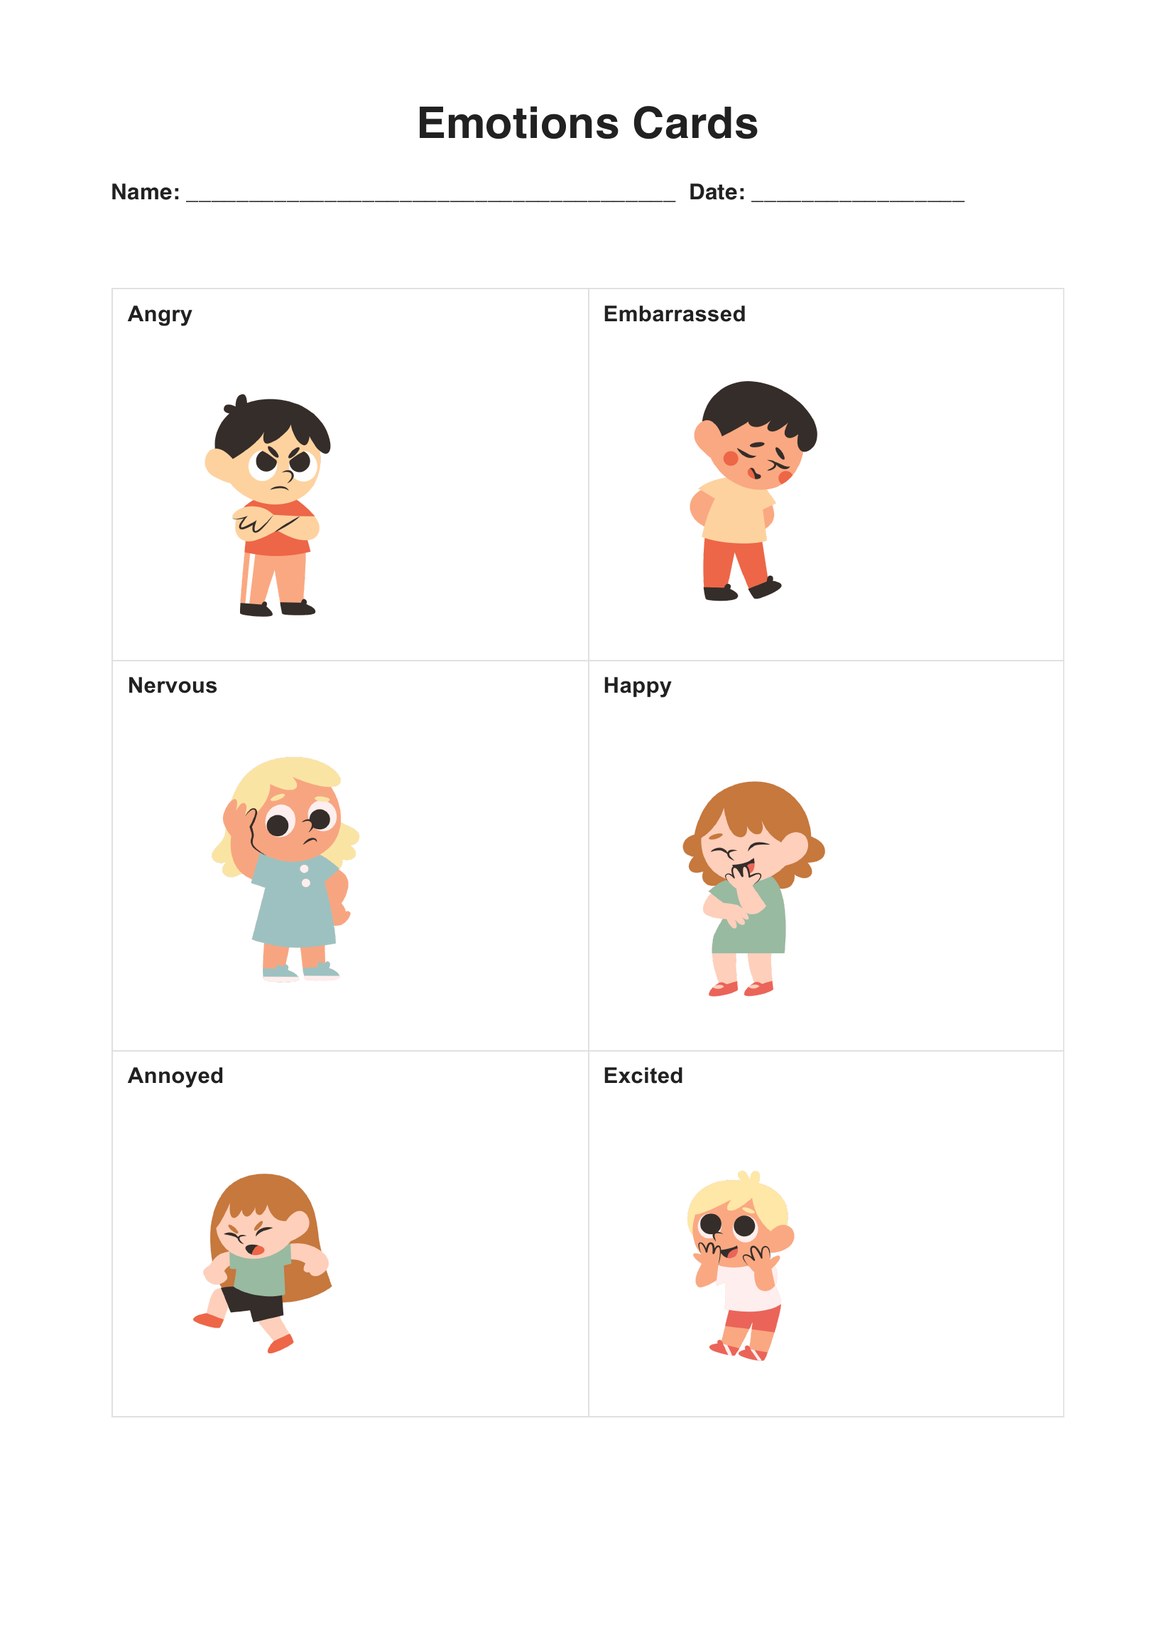 Emotions Cards PDF Example